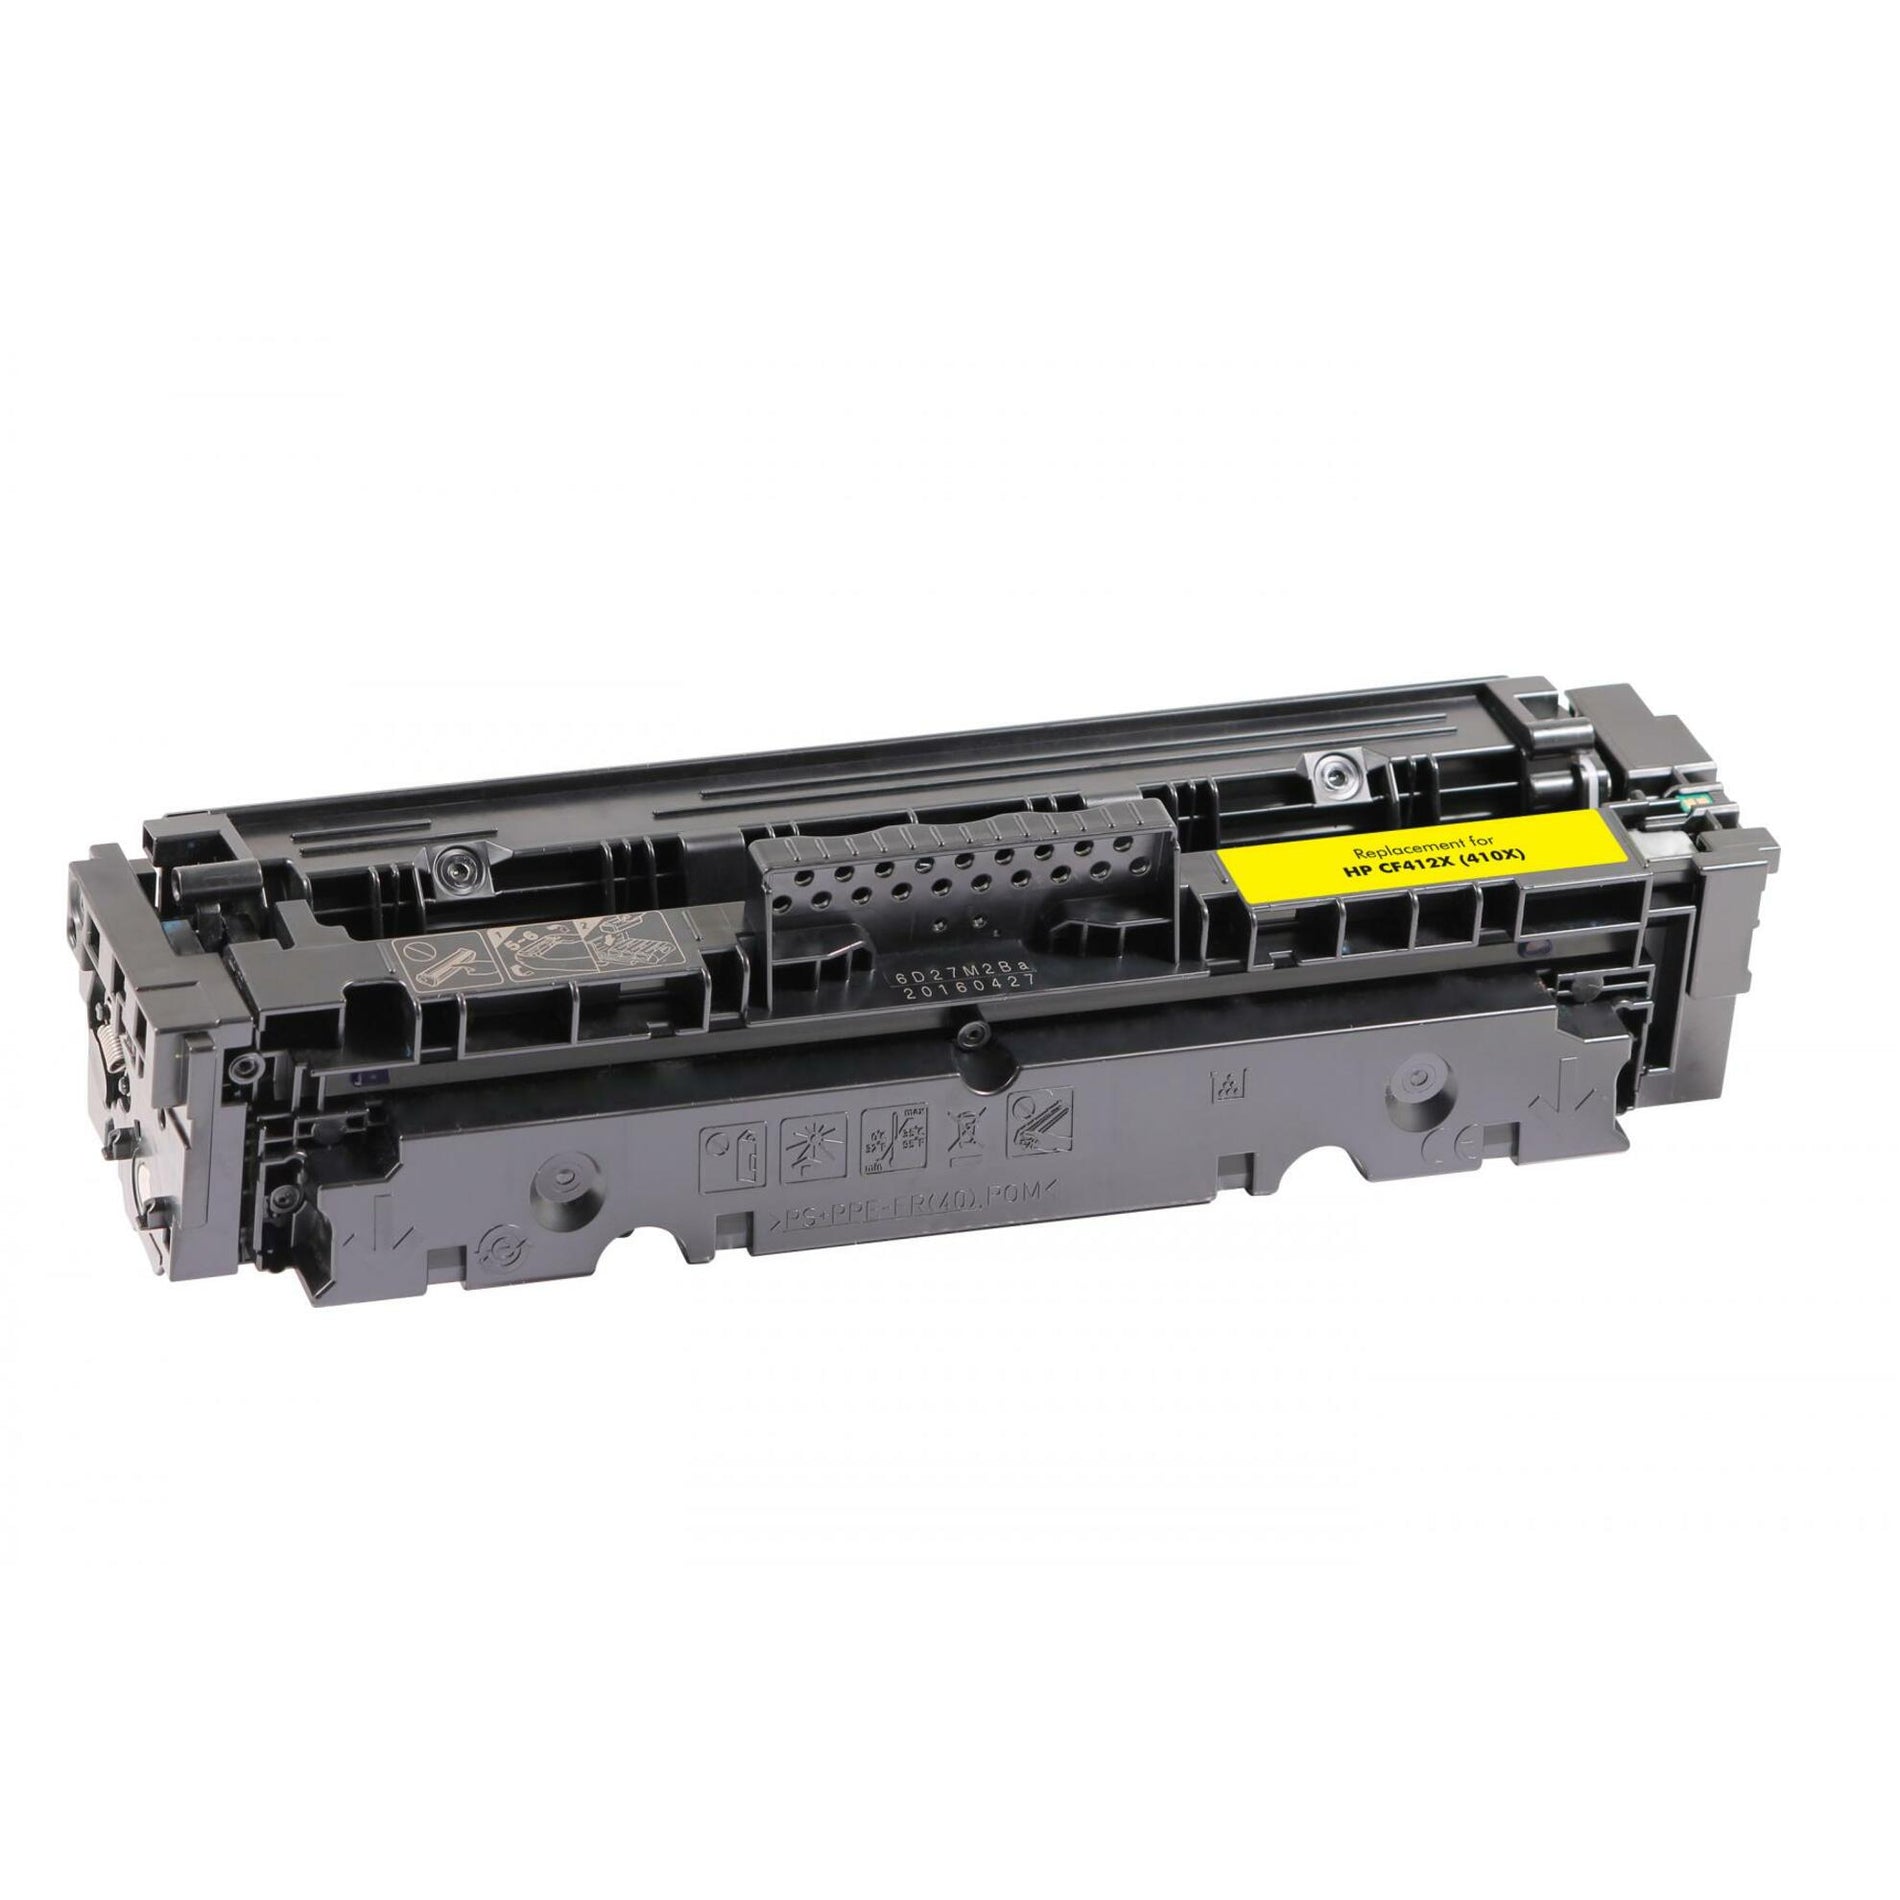 Clover Technologies 200952P Toner Cartridge, High Yield, Yellow, 5000 Pages